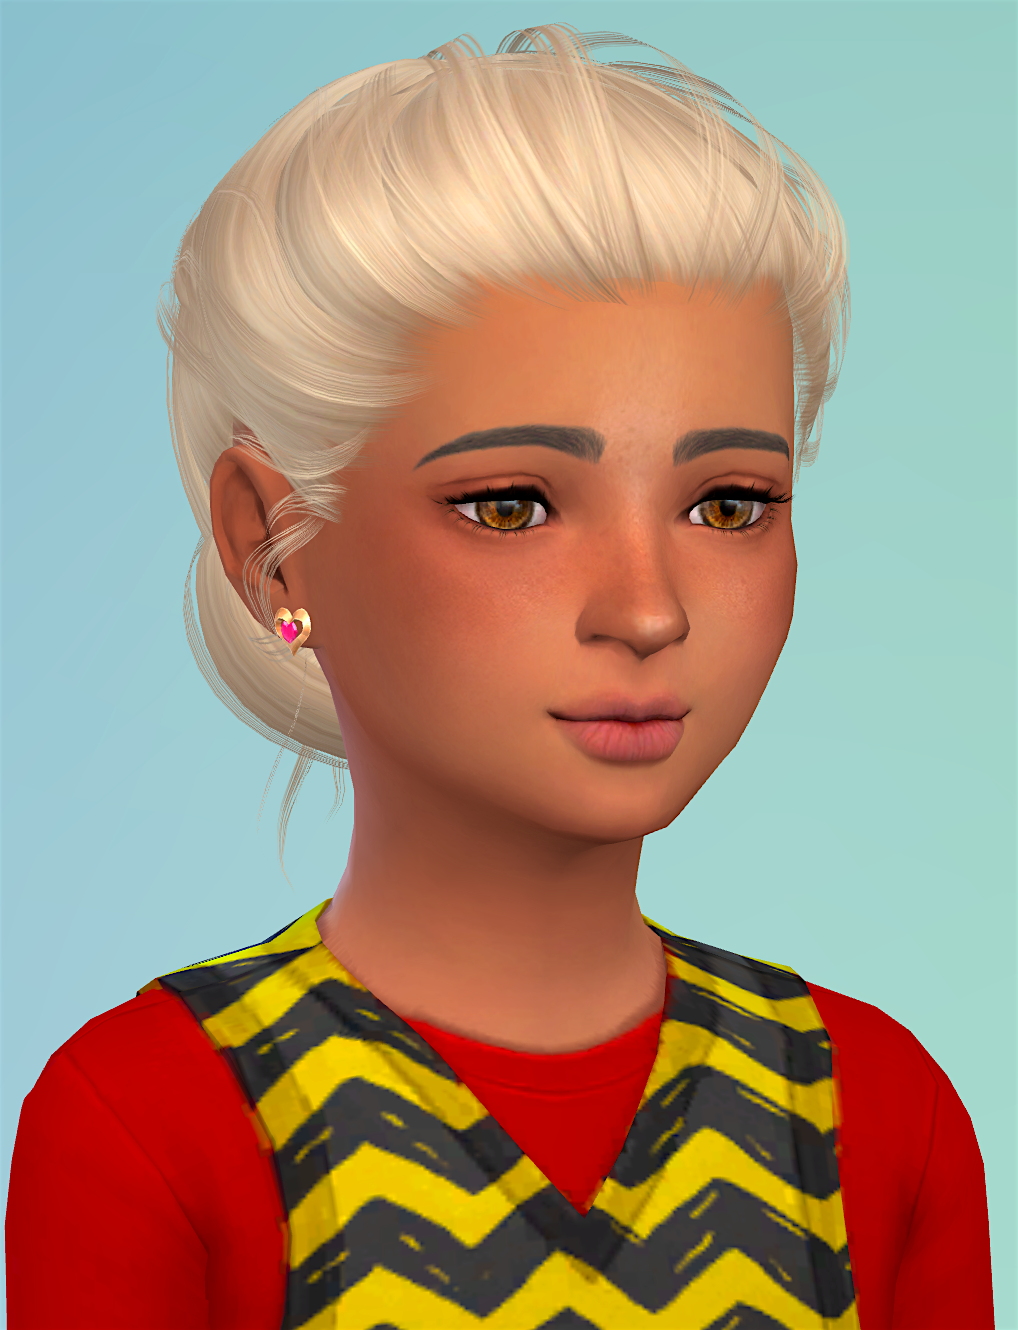  Sims  4  CC s The Best Hair  for Kids  by Sheplayswithlifeee